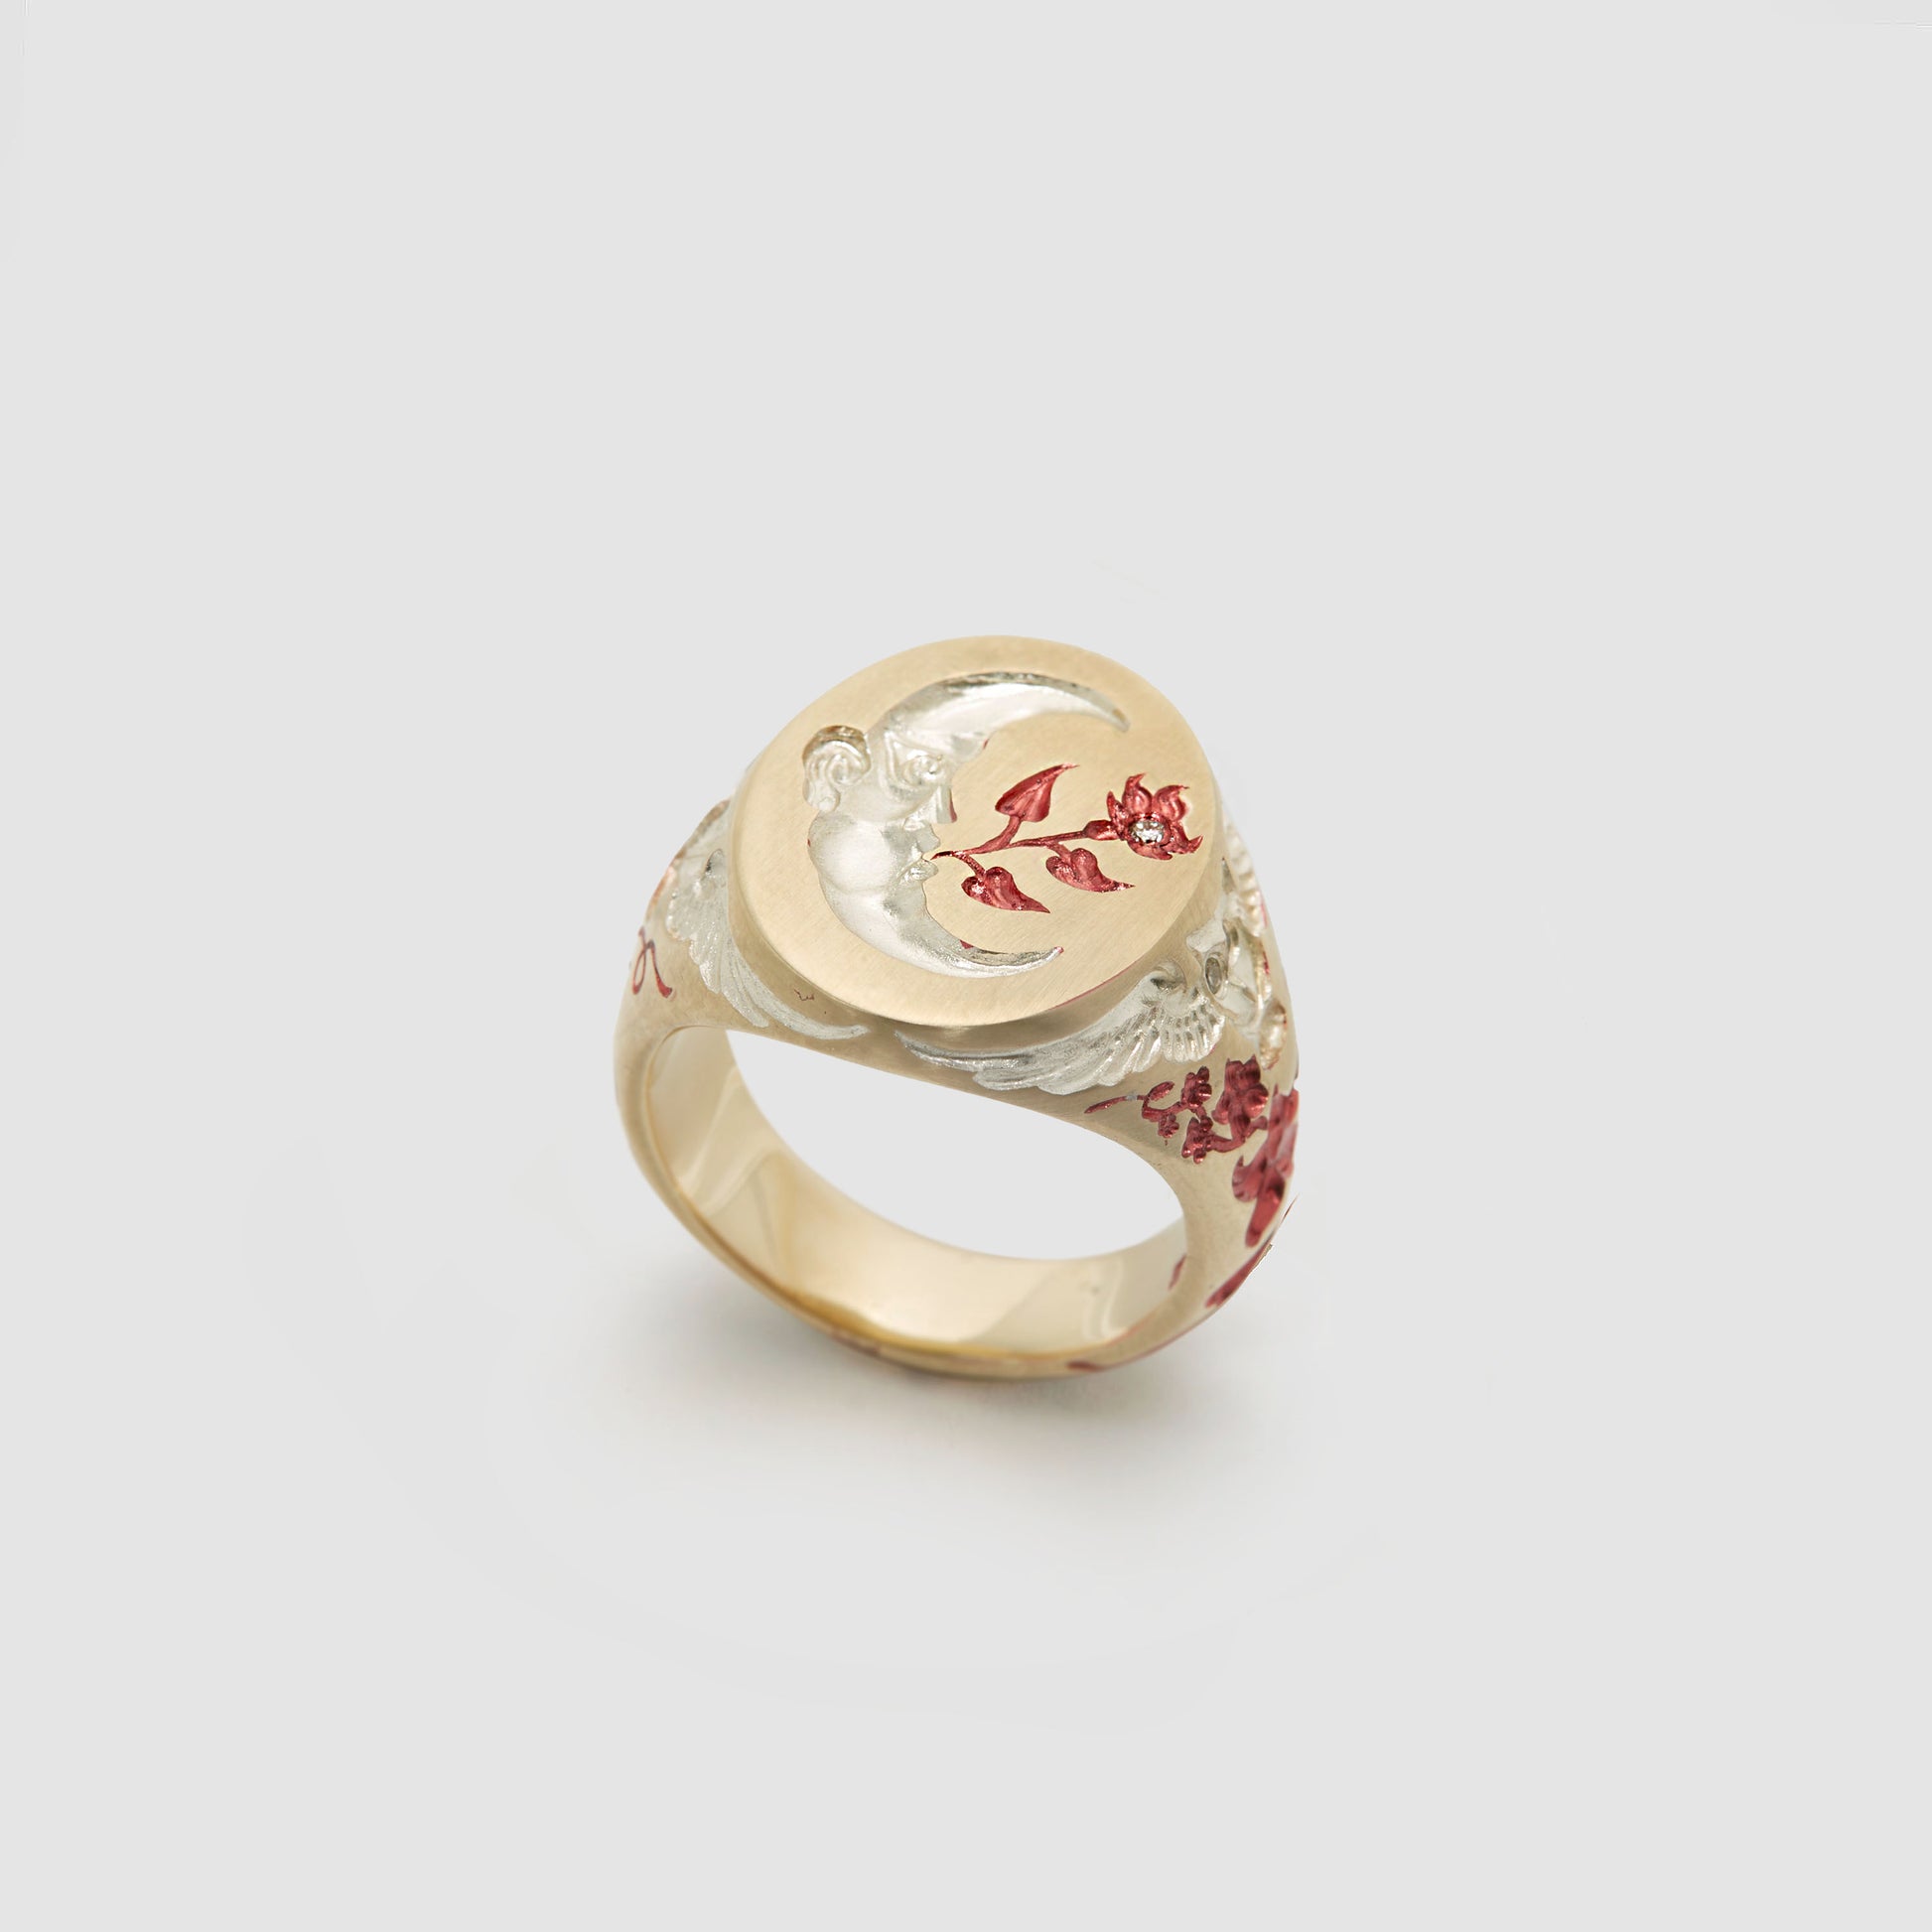 Castro Smith: Gold signet ring with hand engraved moon, flowers and owls set with diamonds and plated in red and silver.. 